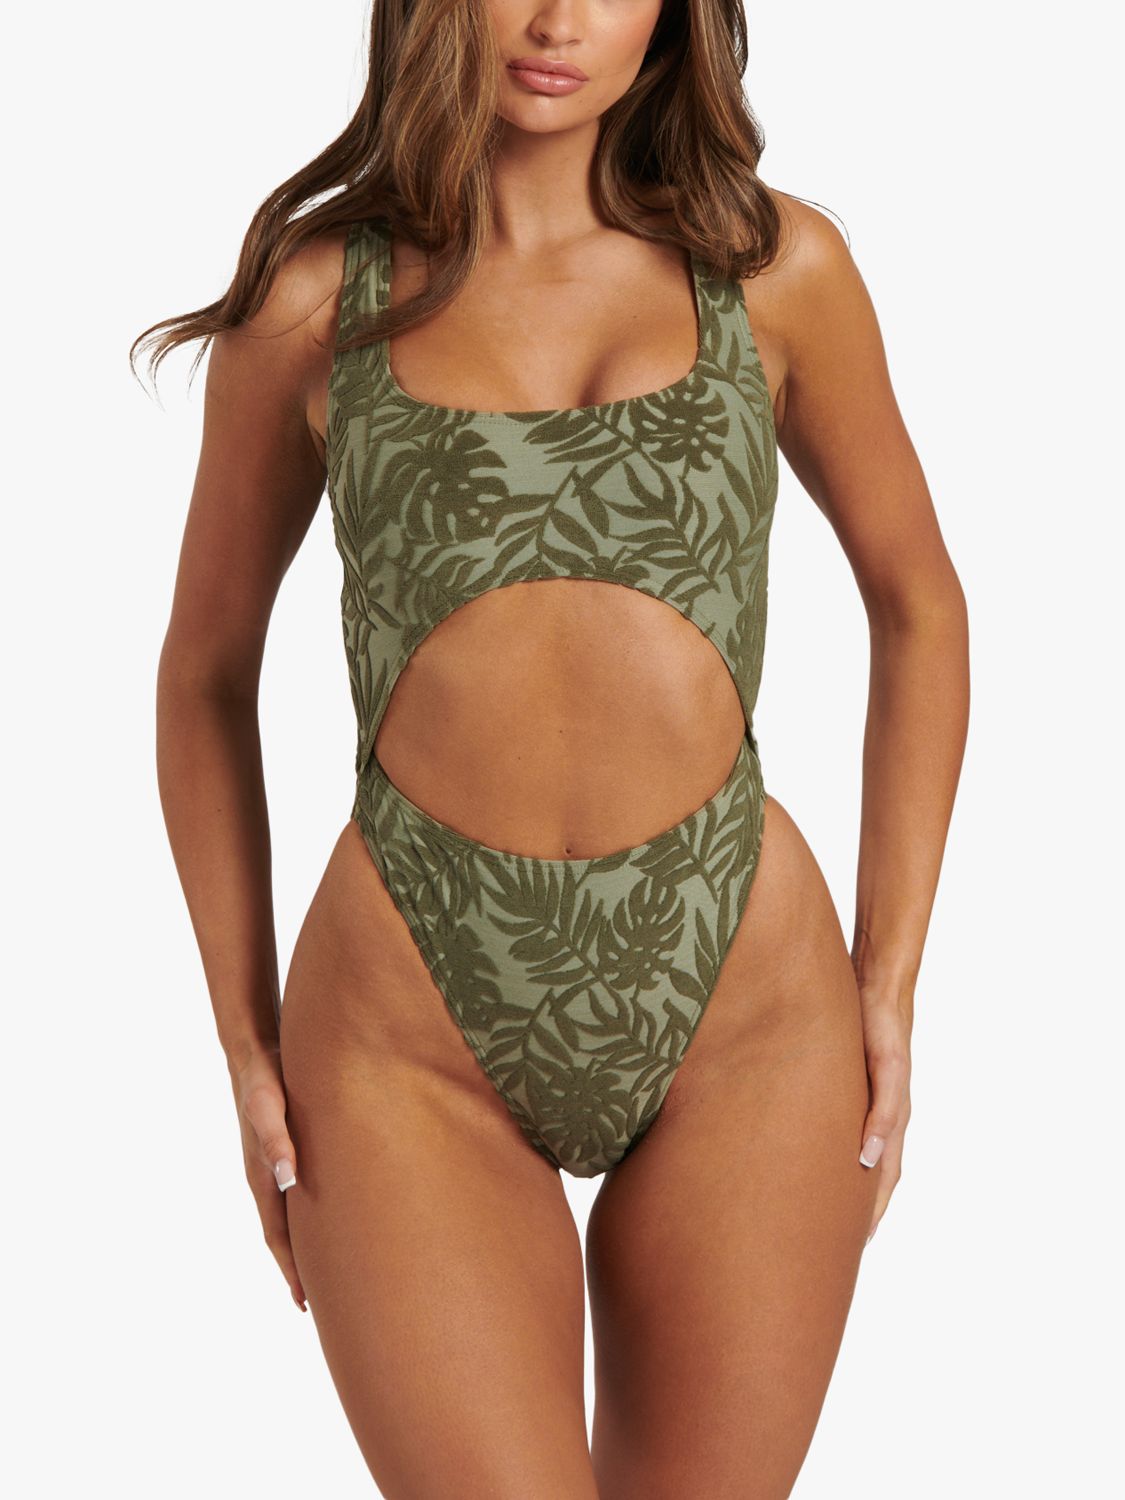 South Beach Embossed Leaf Cut Out Swimsuit, Olive, 8